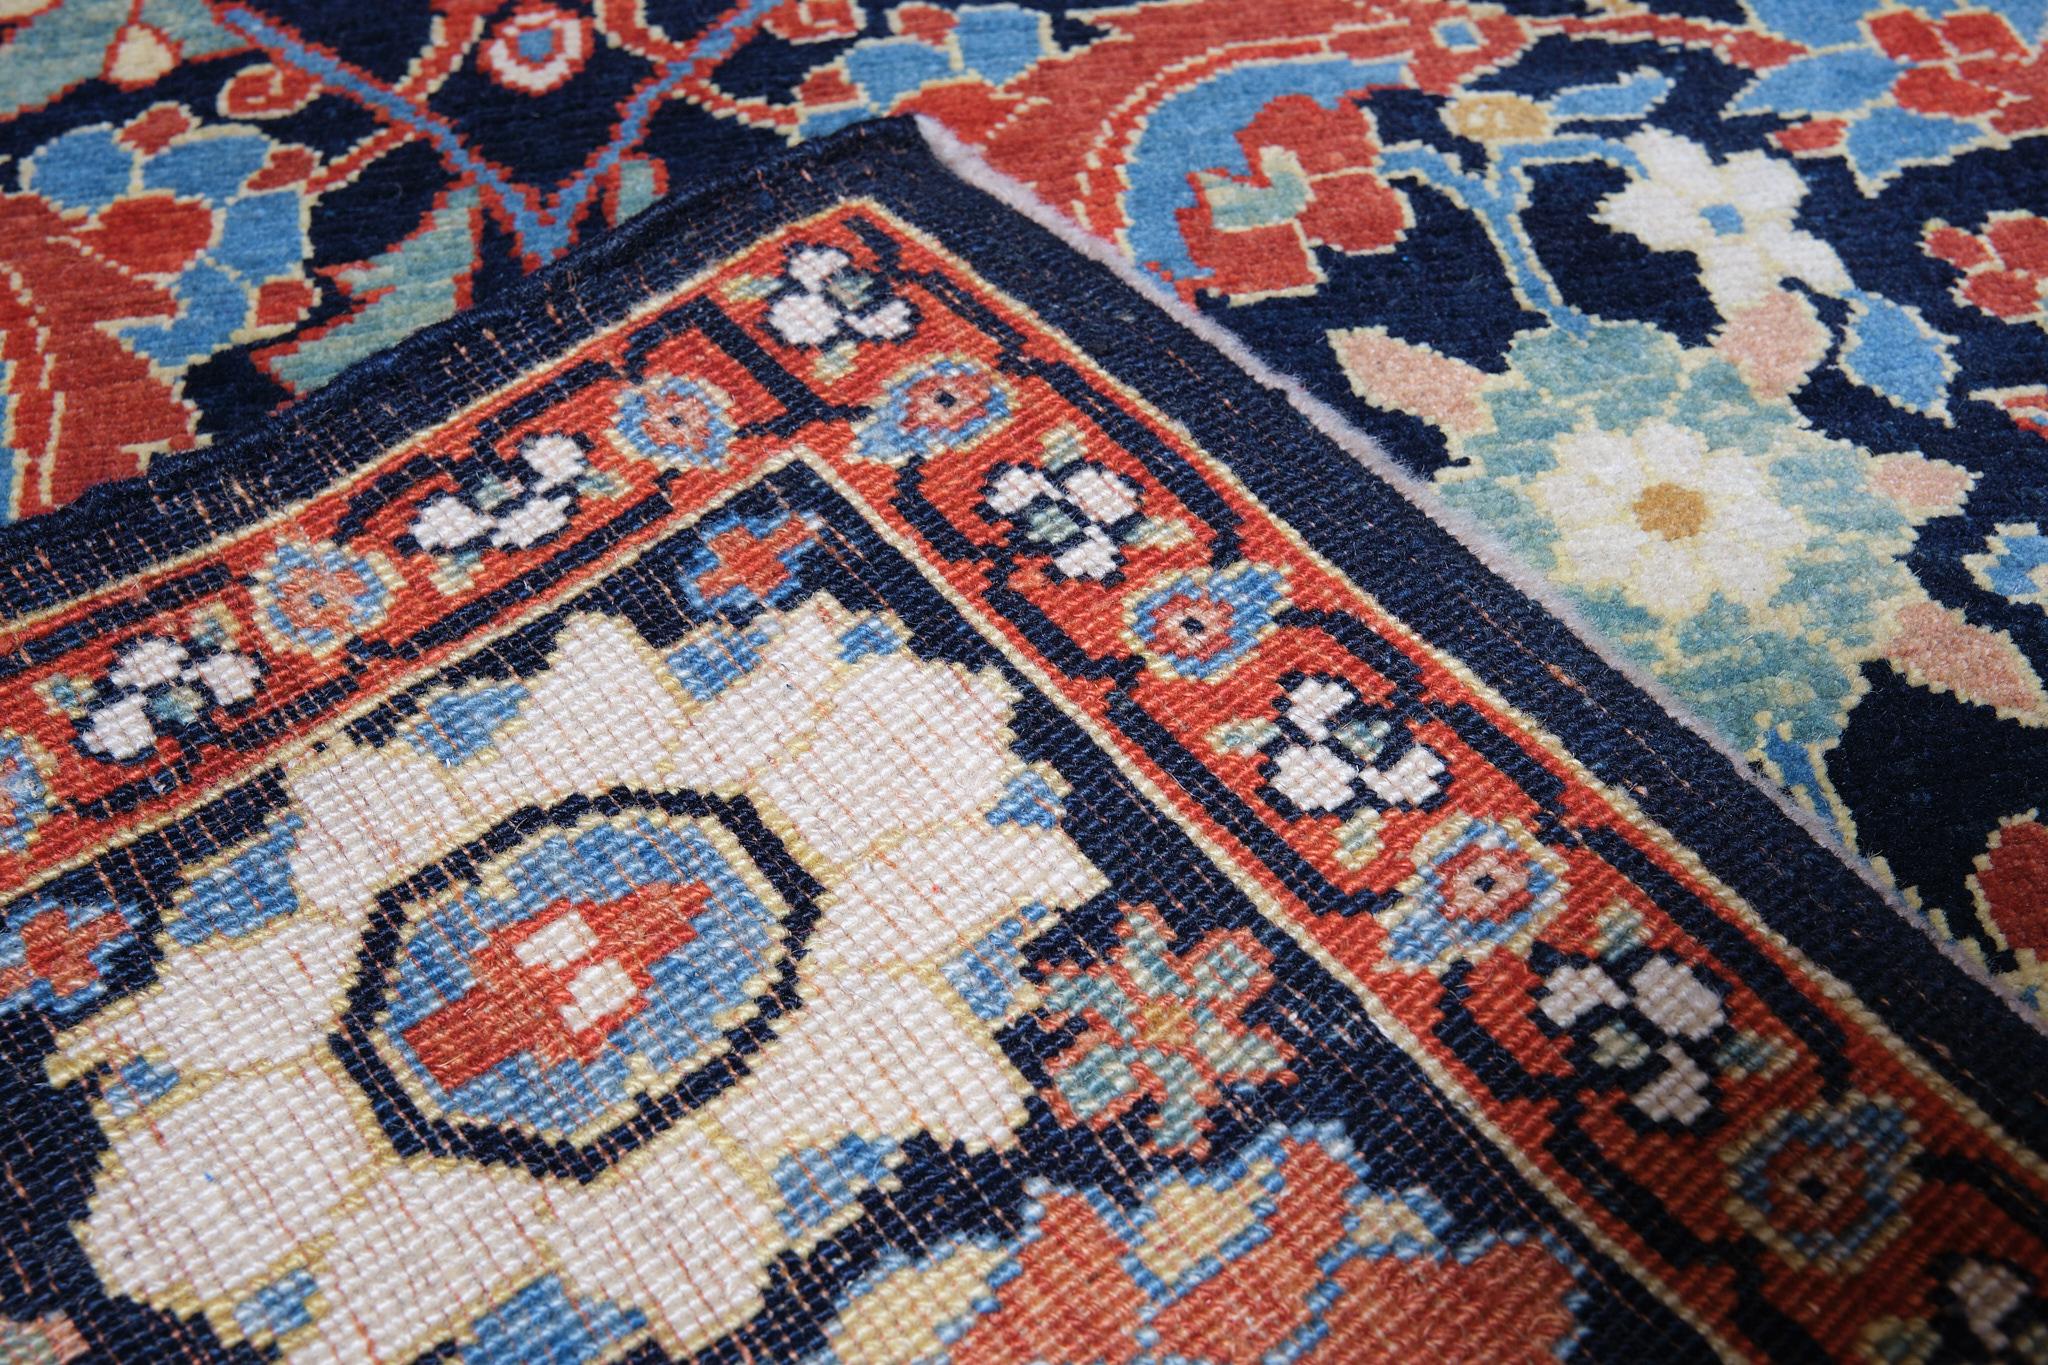 The source of the rug comes from the book Antique Rugs of Kurdistan A Historical Legacy of Woven Art, James D. Burns, 2002 nr.31. This blue background rug has a variation of Masi Awita (fish around the lotus) pattern from Senna, Eastern Kurdistan